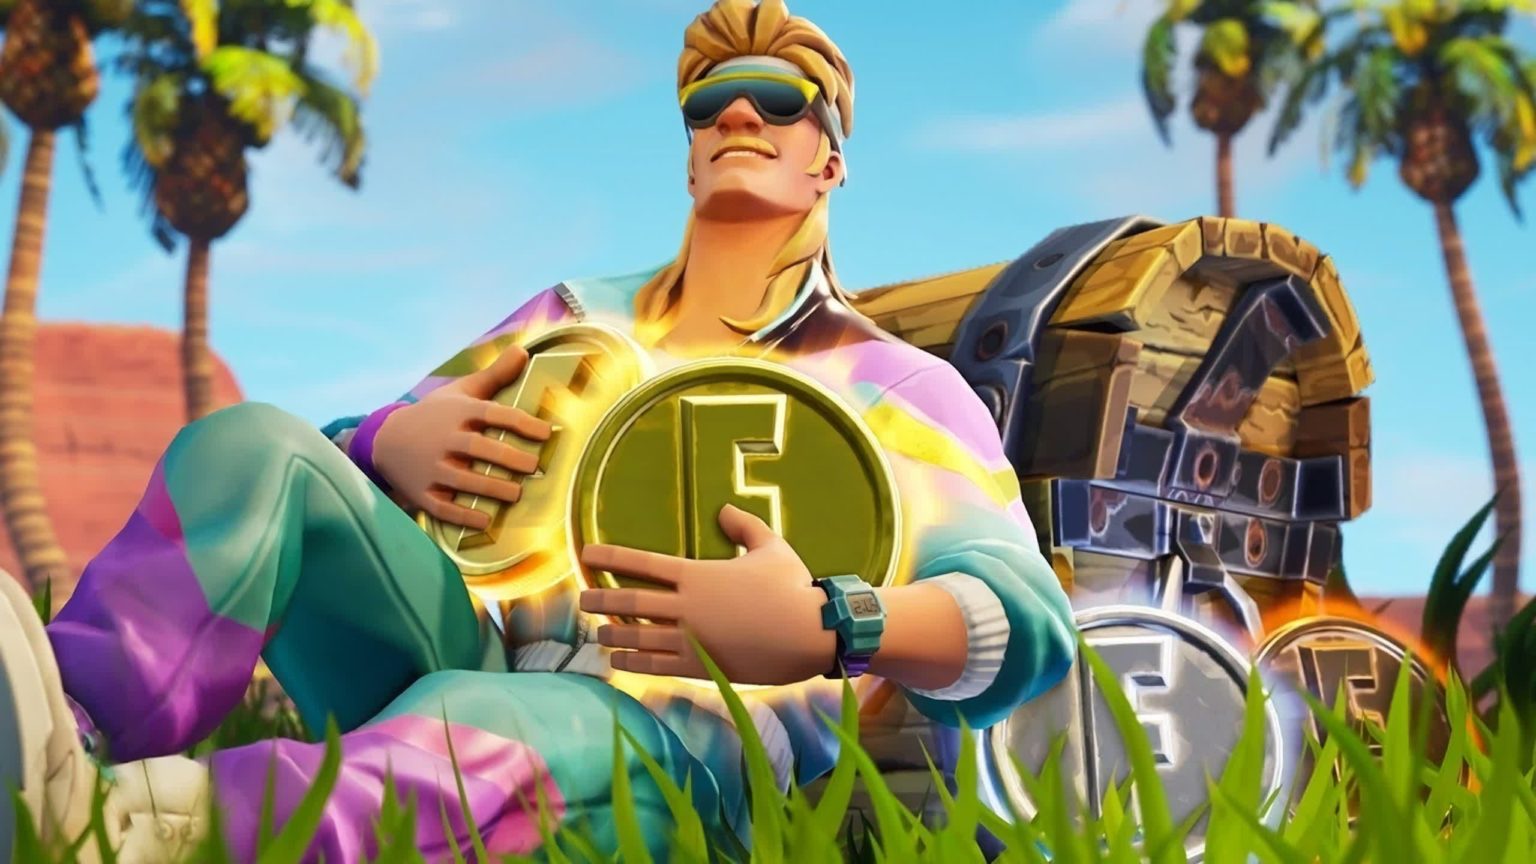 A ransomware group says it has stolen almost 200GB of data from Epic Games (updated)